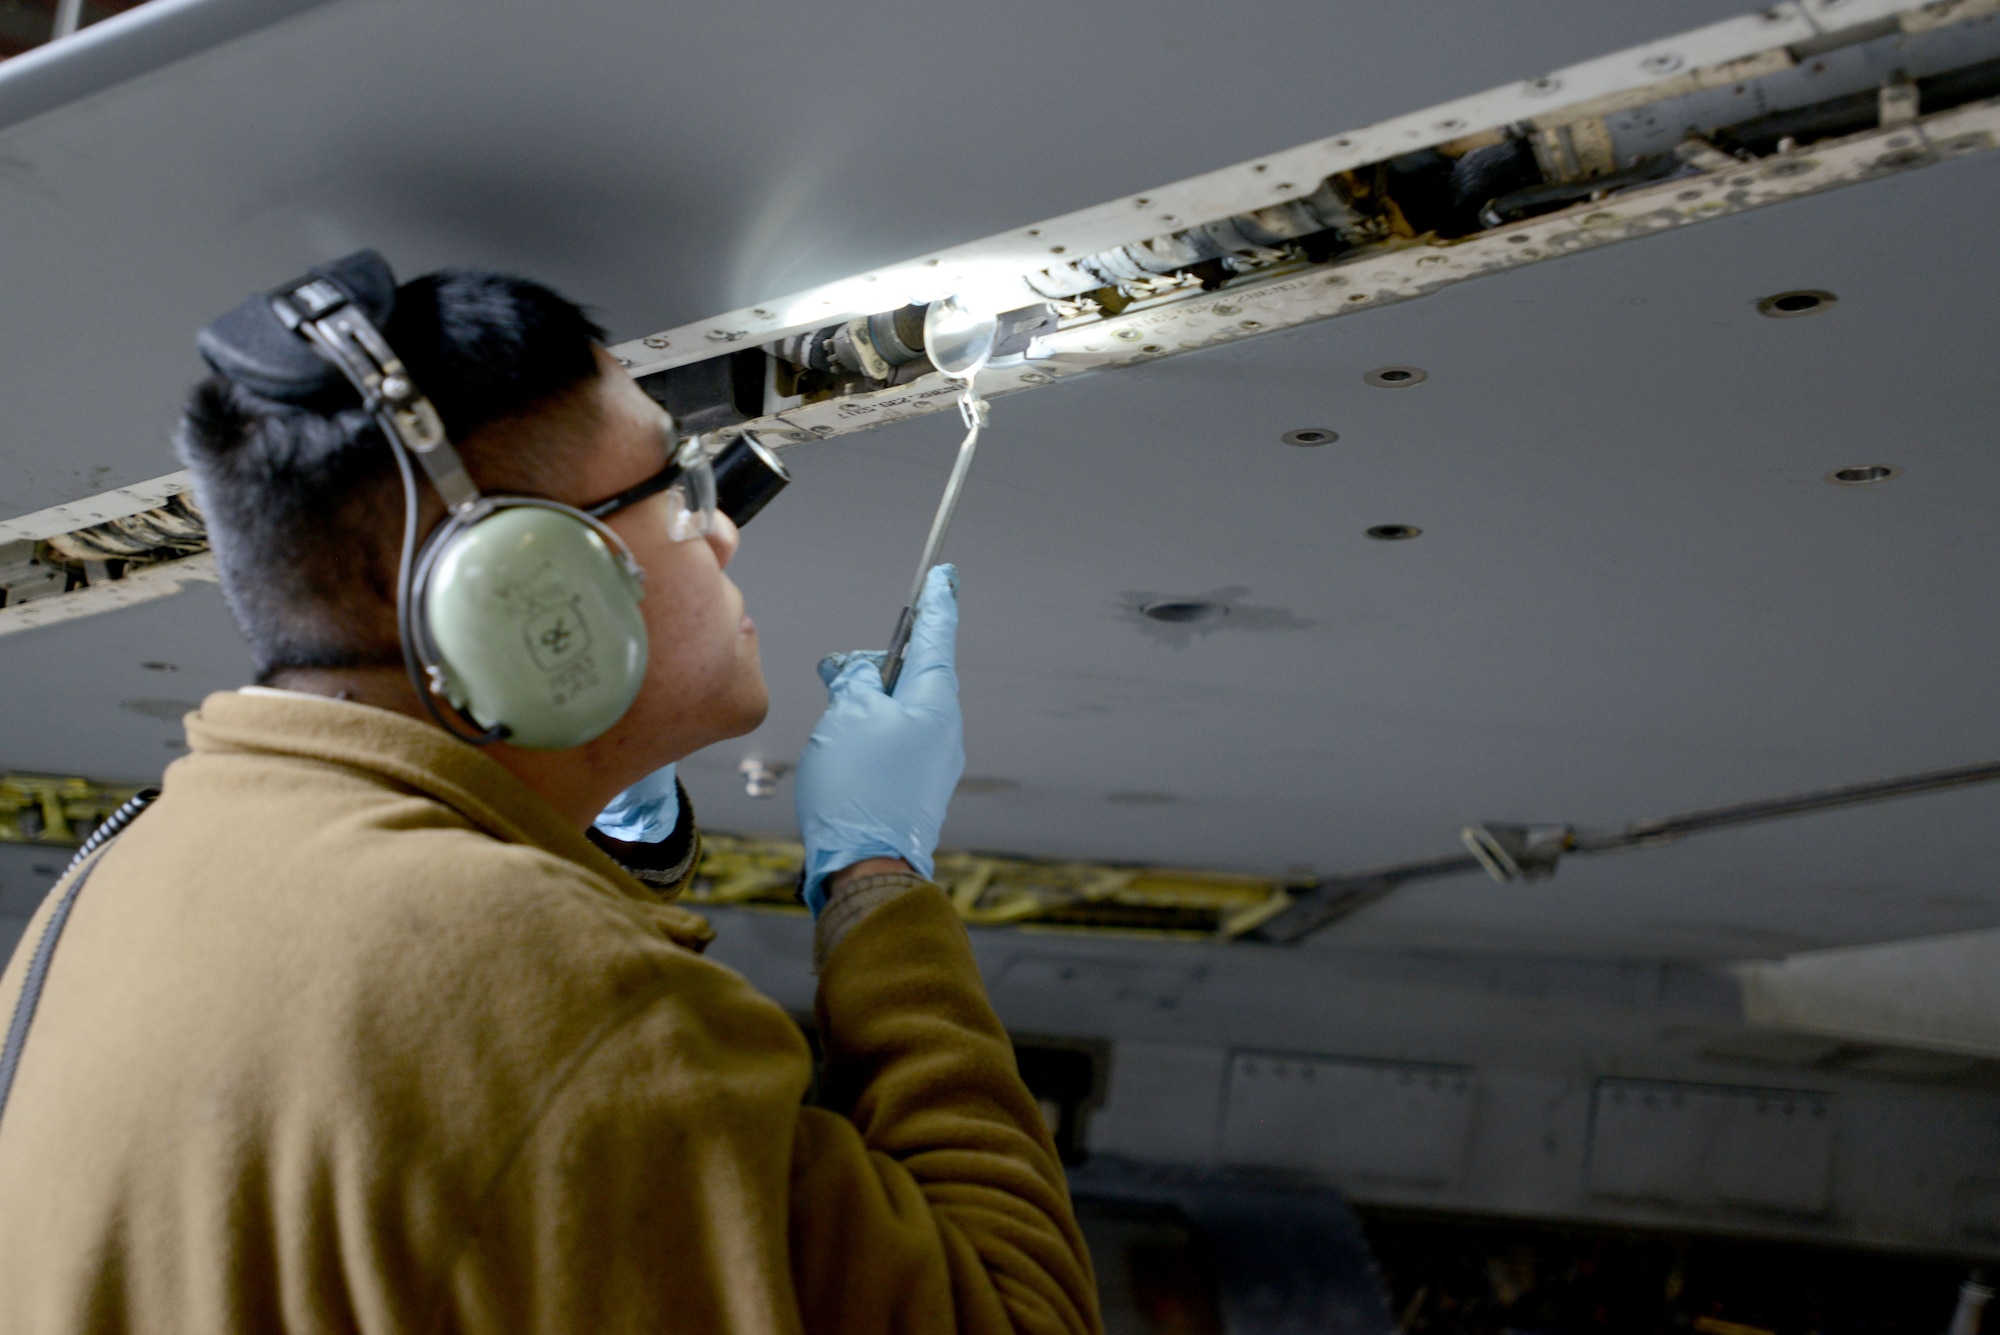 The wing is opened up and inspected for internal cracks to ensure structural integrity. (U.S. Air Force photo by Airman 1st Class Benjamin Ingold)